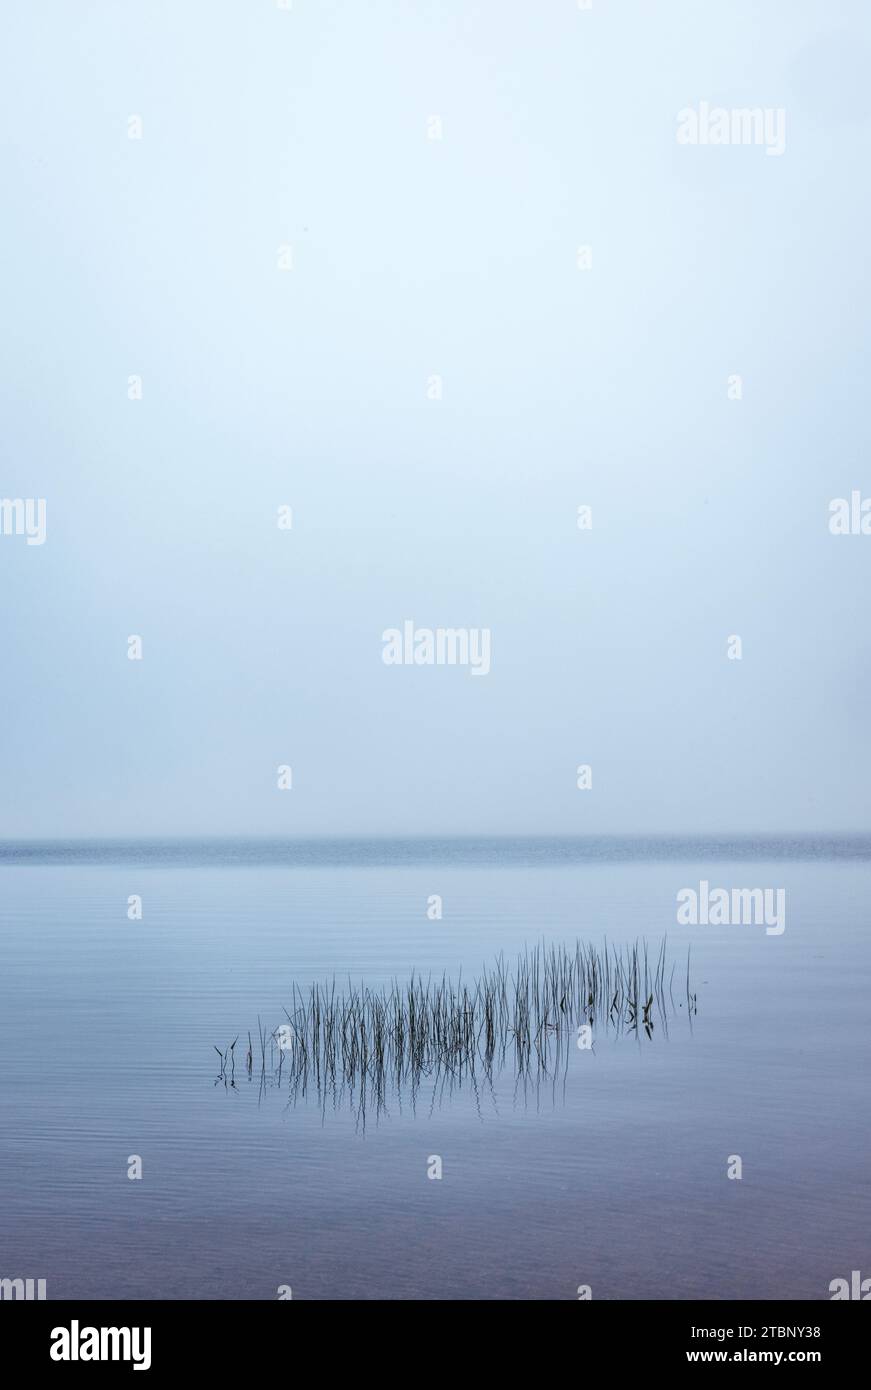 Minimalist image of grass in a pond or lake with fog and mist. Stock Photo